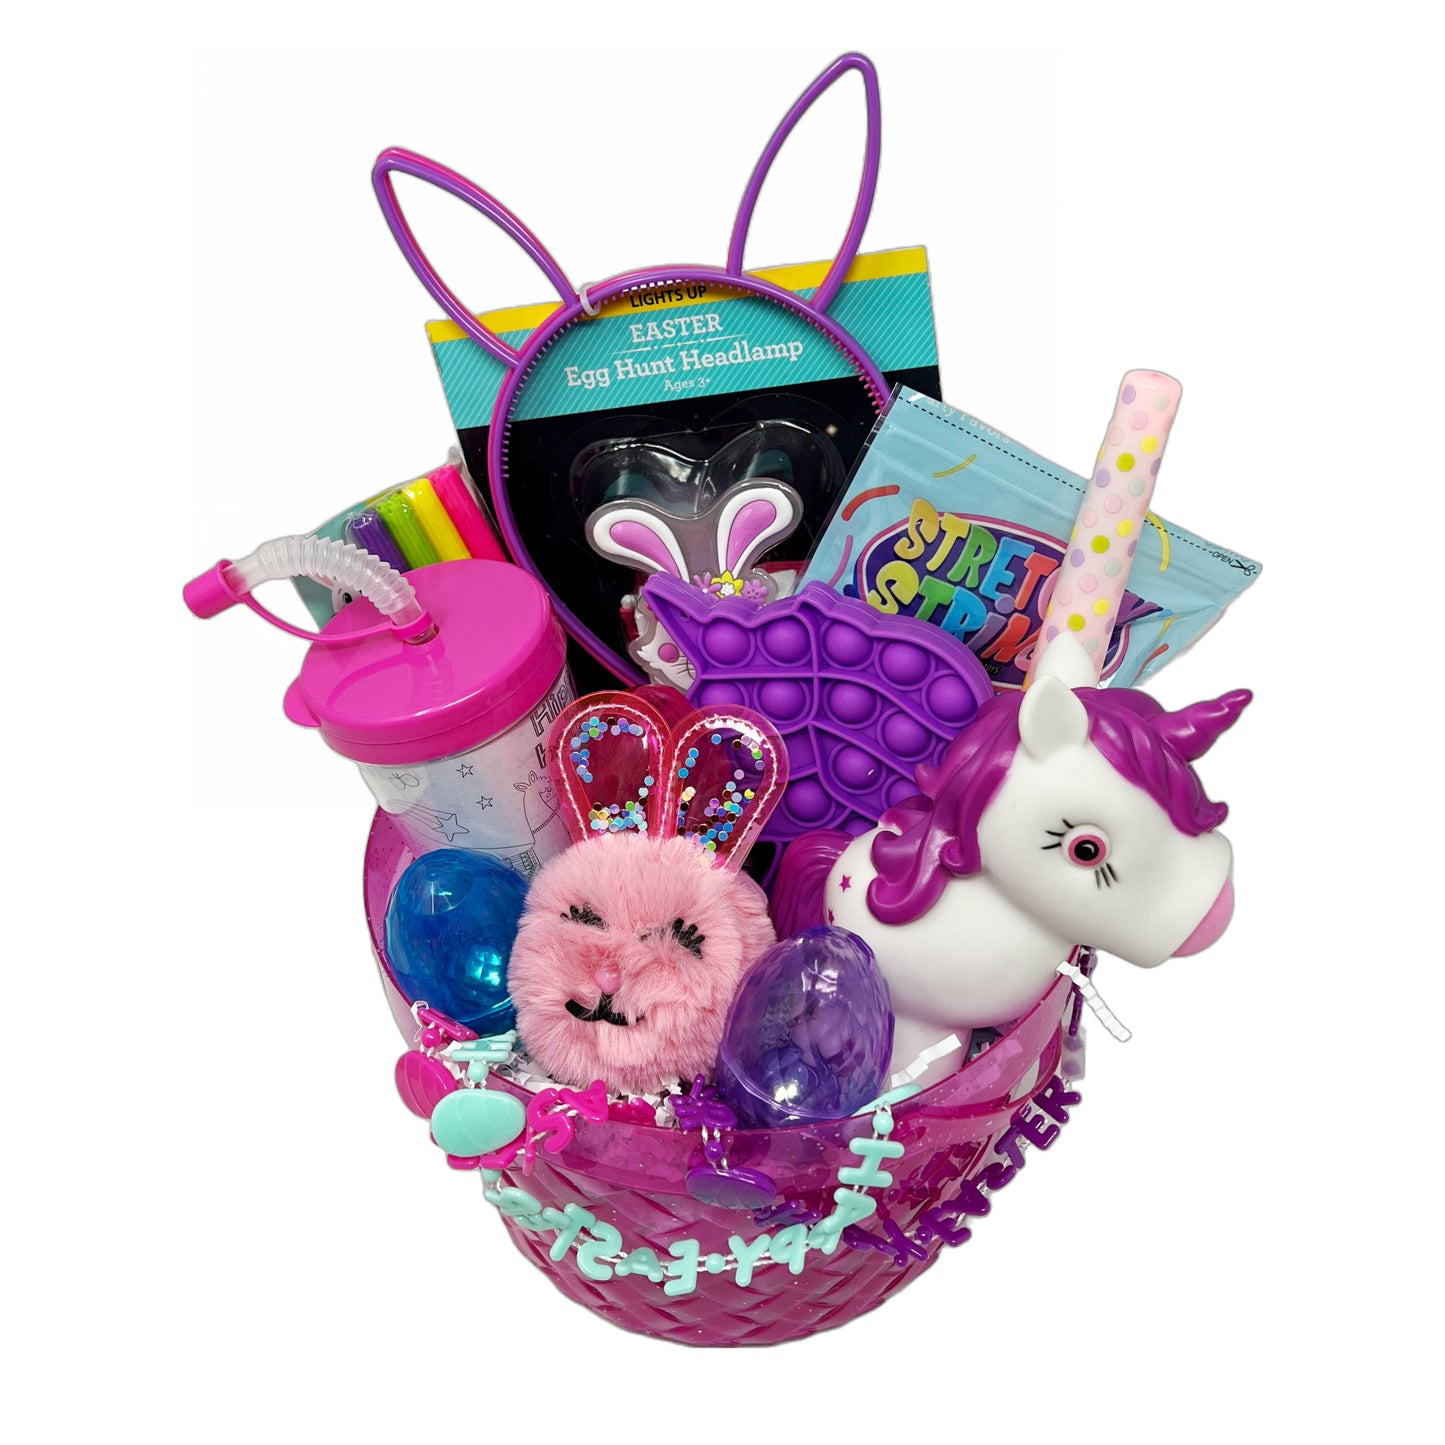 Cheep N Cheerful Deluxe Build a Basket Girl Novelty Toys, LED Easter Basket with Novelty Easter Toys, 16 Pcs